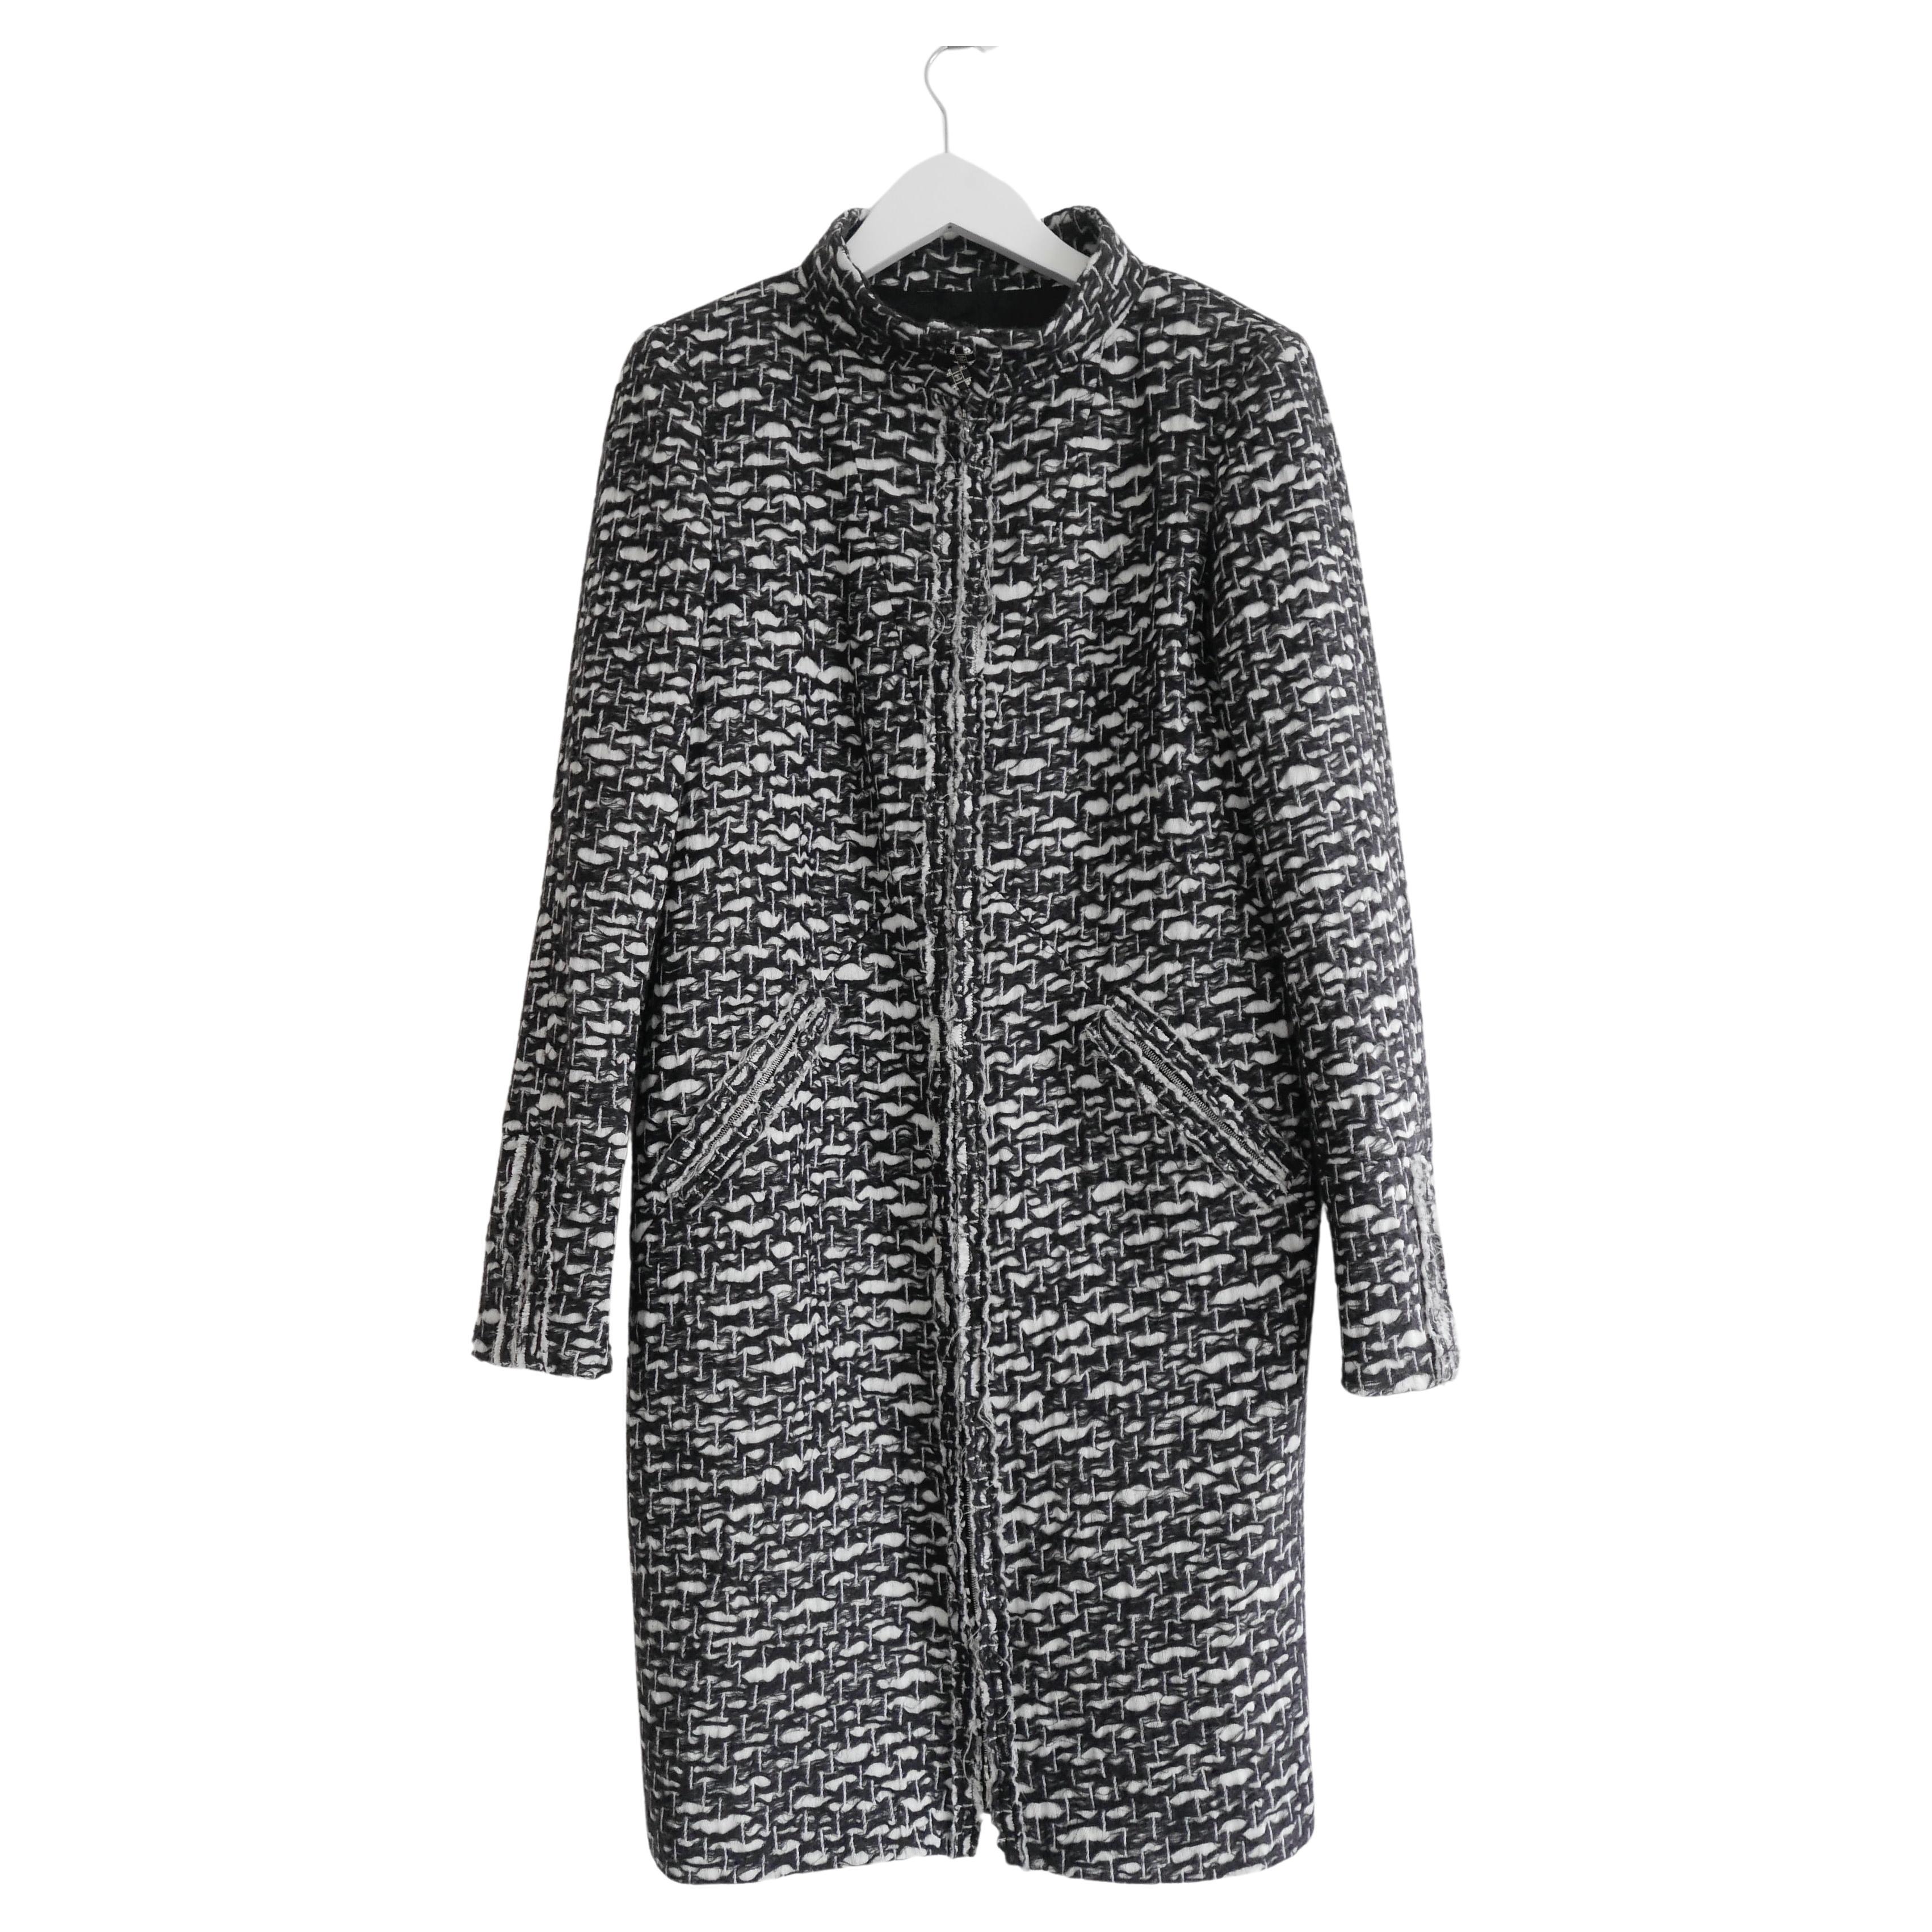 Chanel Fall 2010 Black & White Loose Weave Tweed Coat For Sale